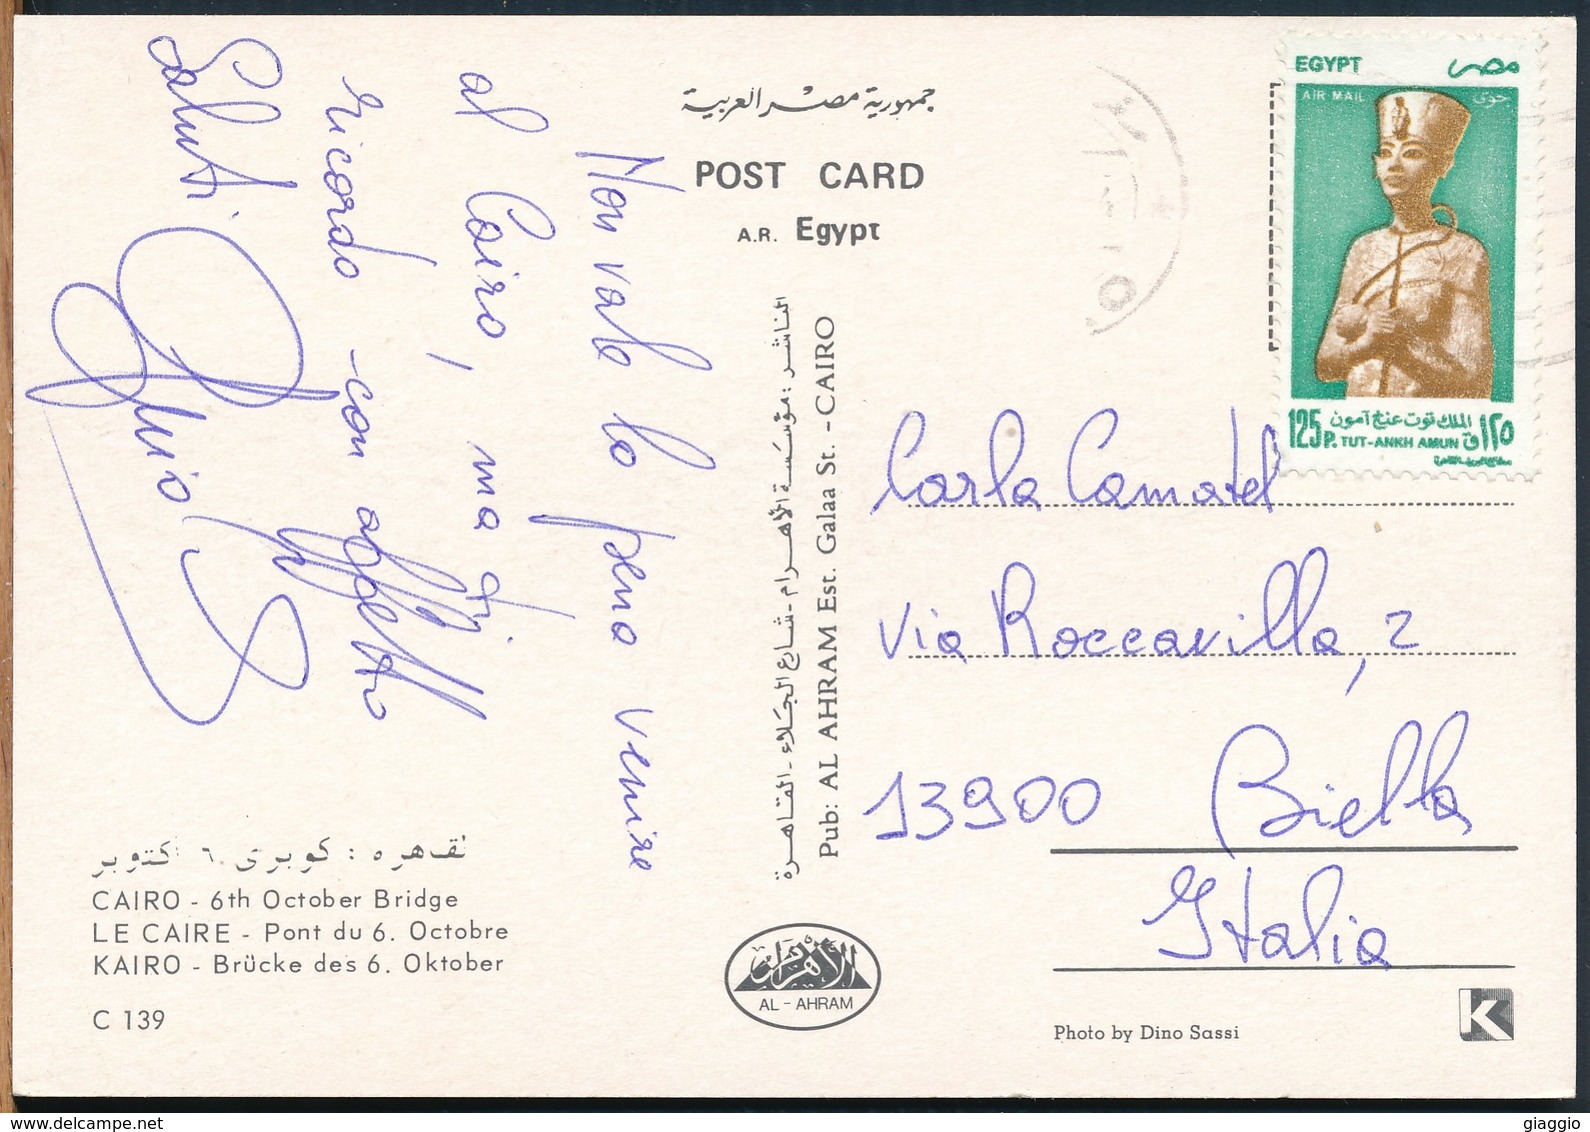 °°° 18717 - EGYPT - CAIRO - 6th OCTOBER BRIDGE - With Stamps °°° - 6th Of October City